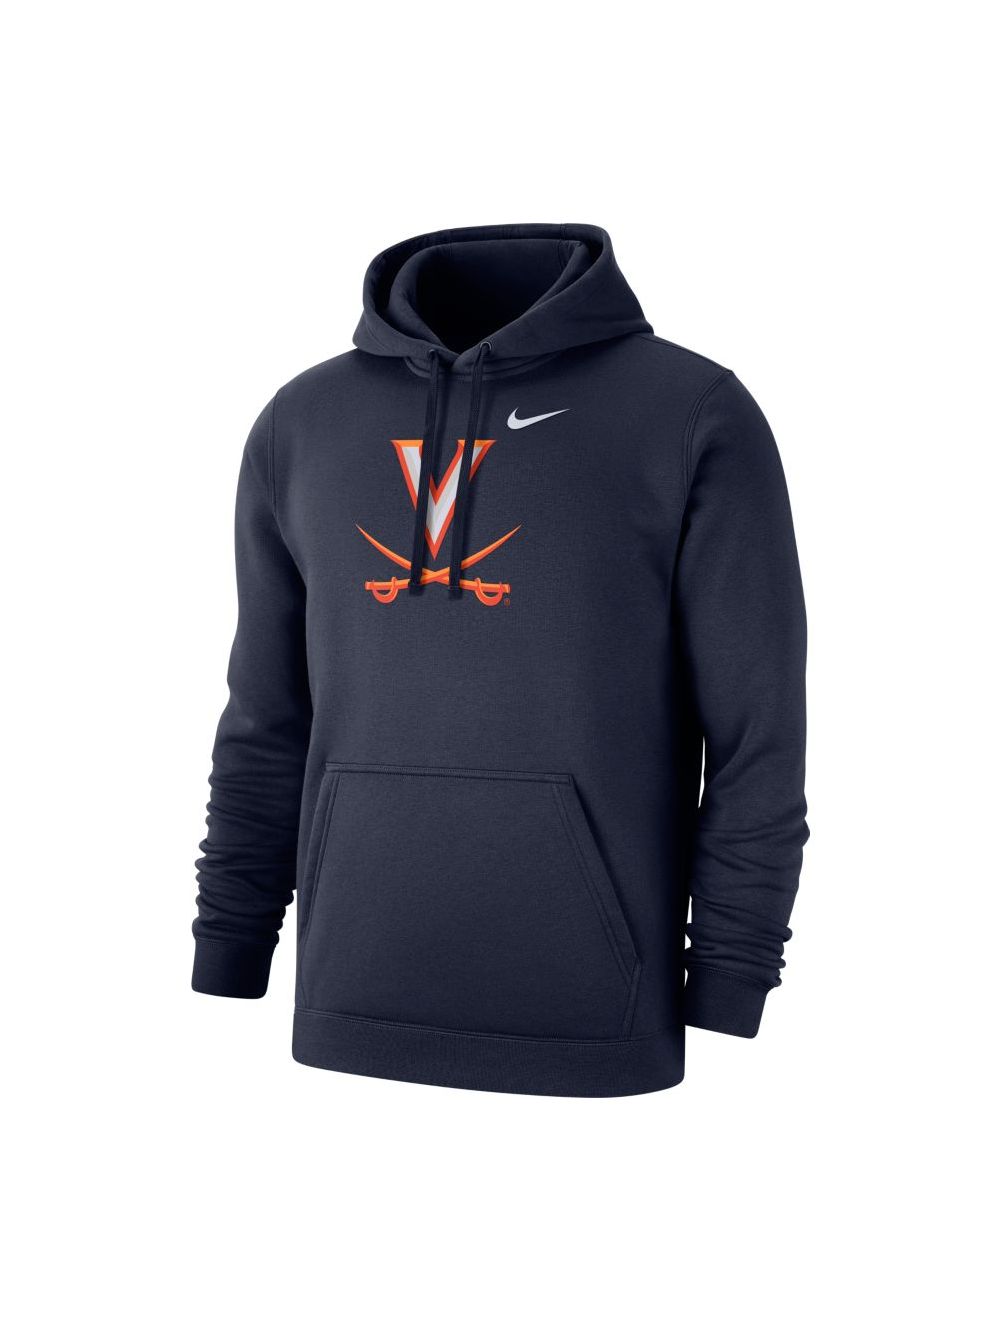 Nike Navy Hooded Sweatshirt with V and Crossed Sabers - Mincer's of ...